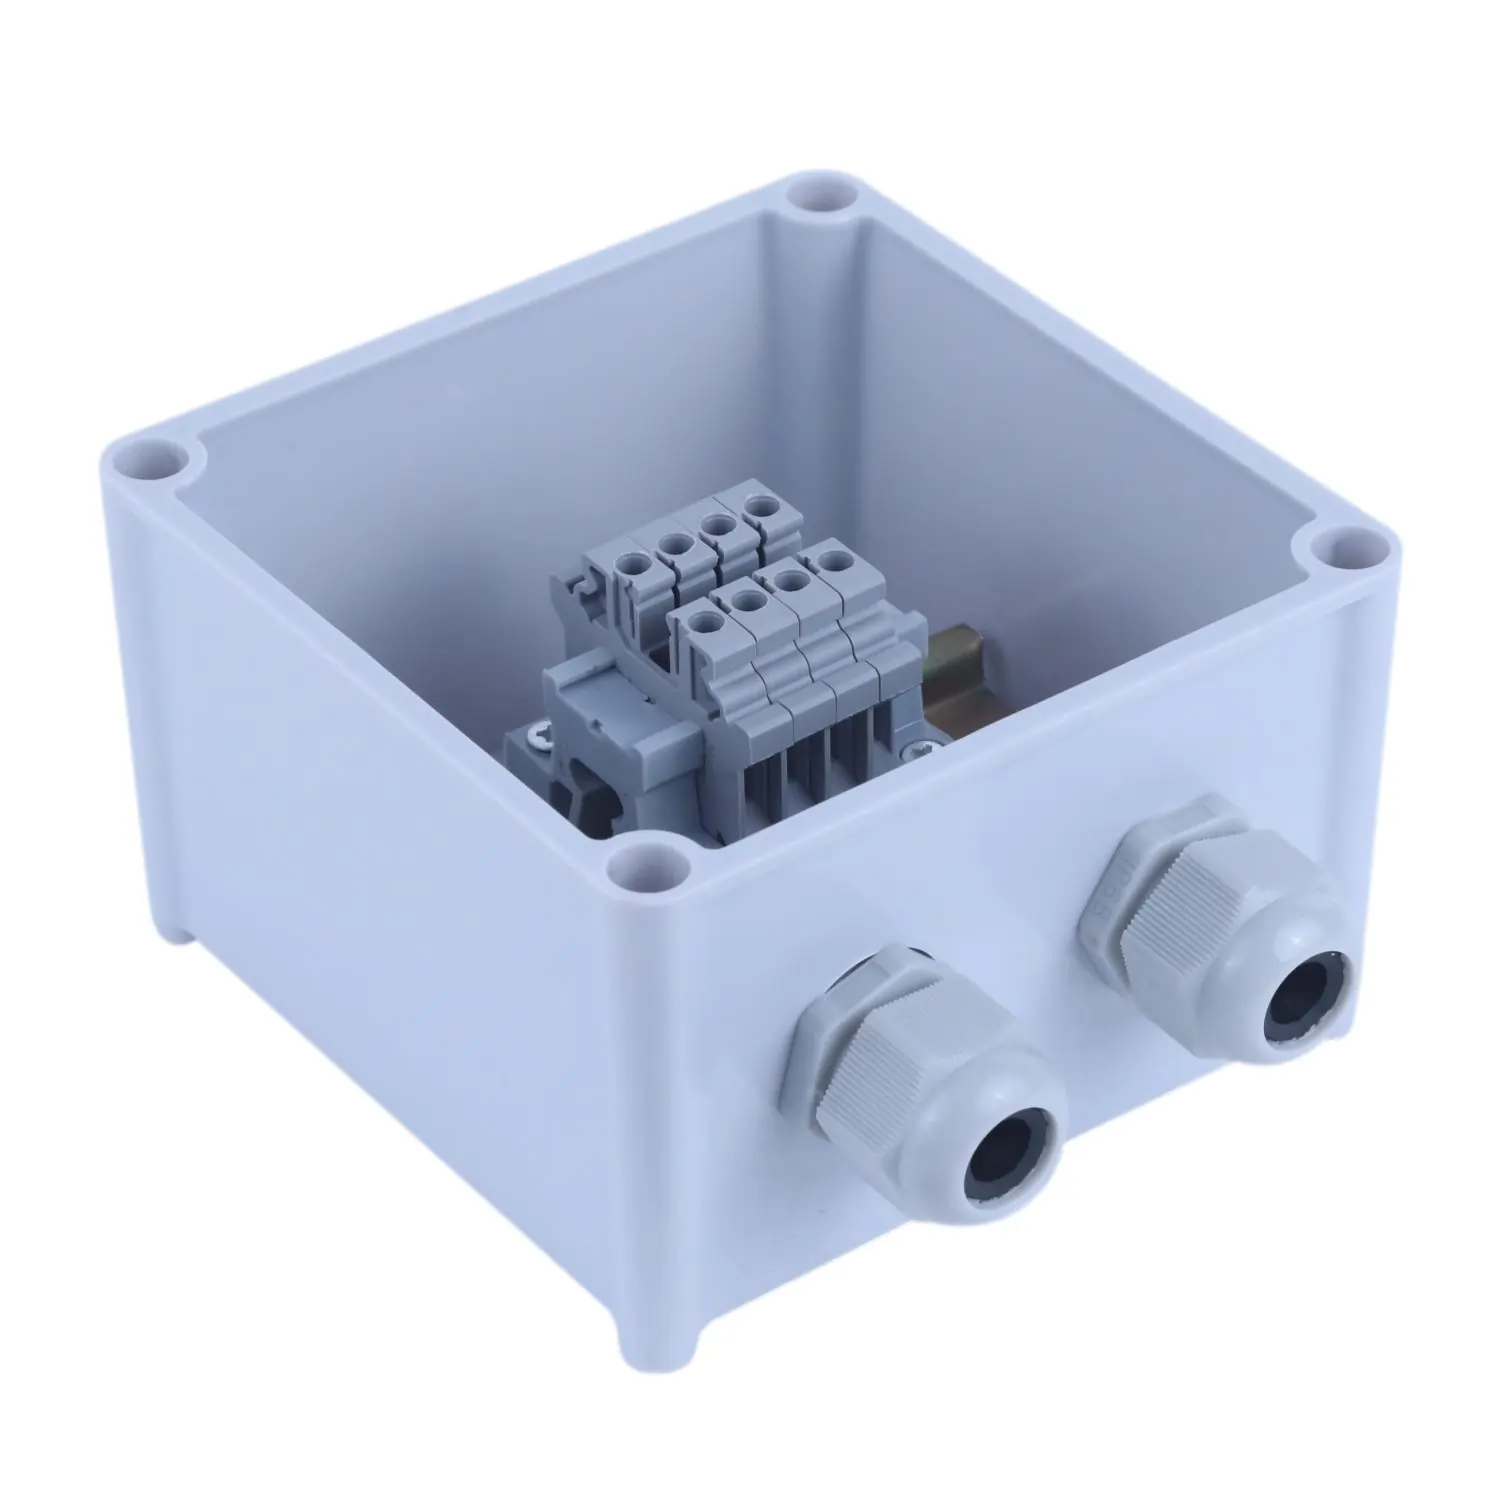 Terminal Junction Box with 4 Terminal 4 sqmm & 2 Glands iso